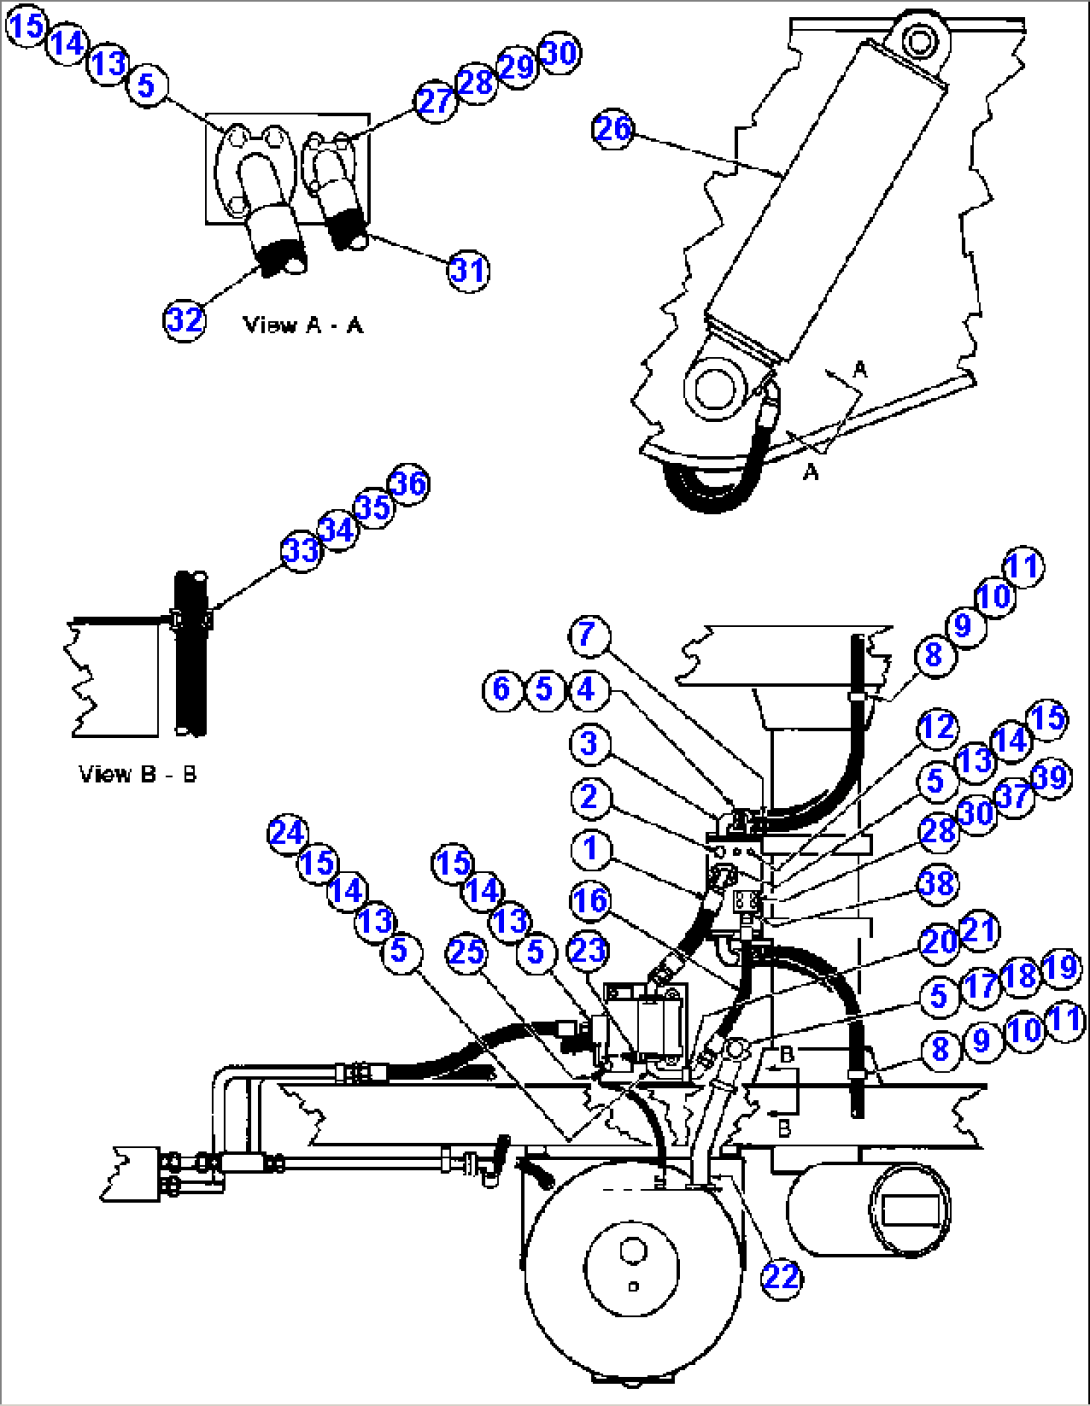 HOIST SYSTEM PIPING